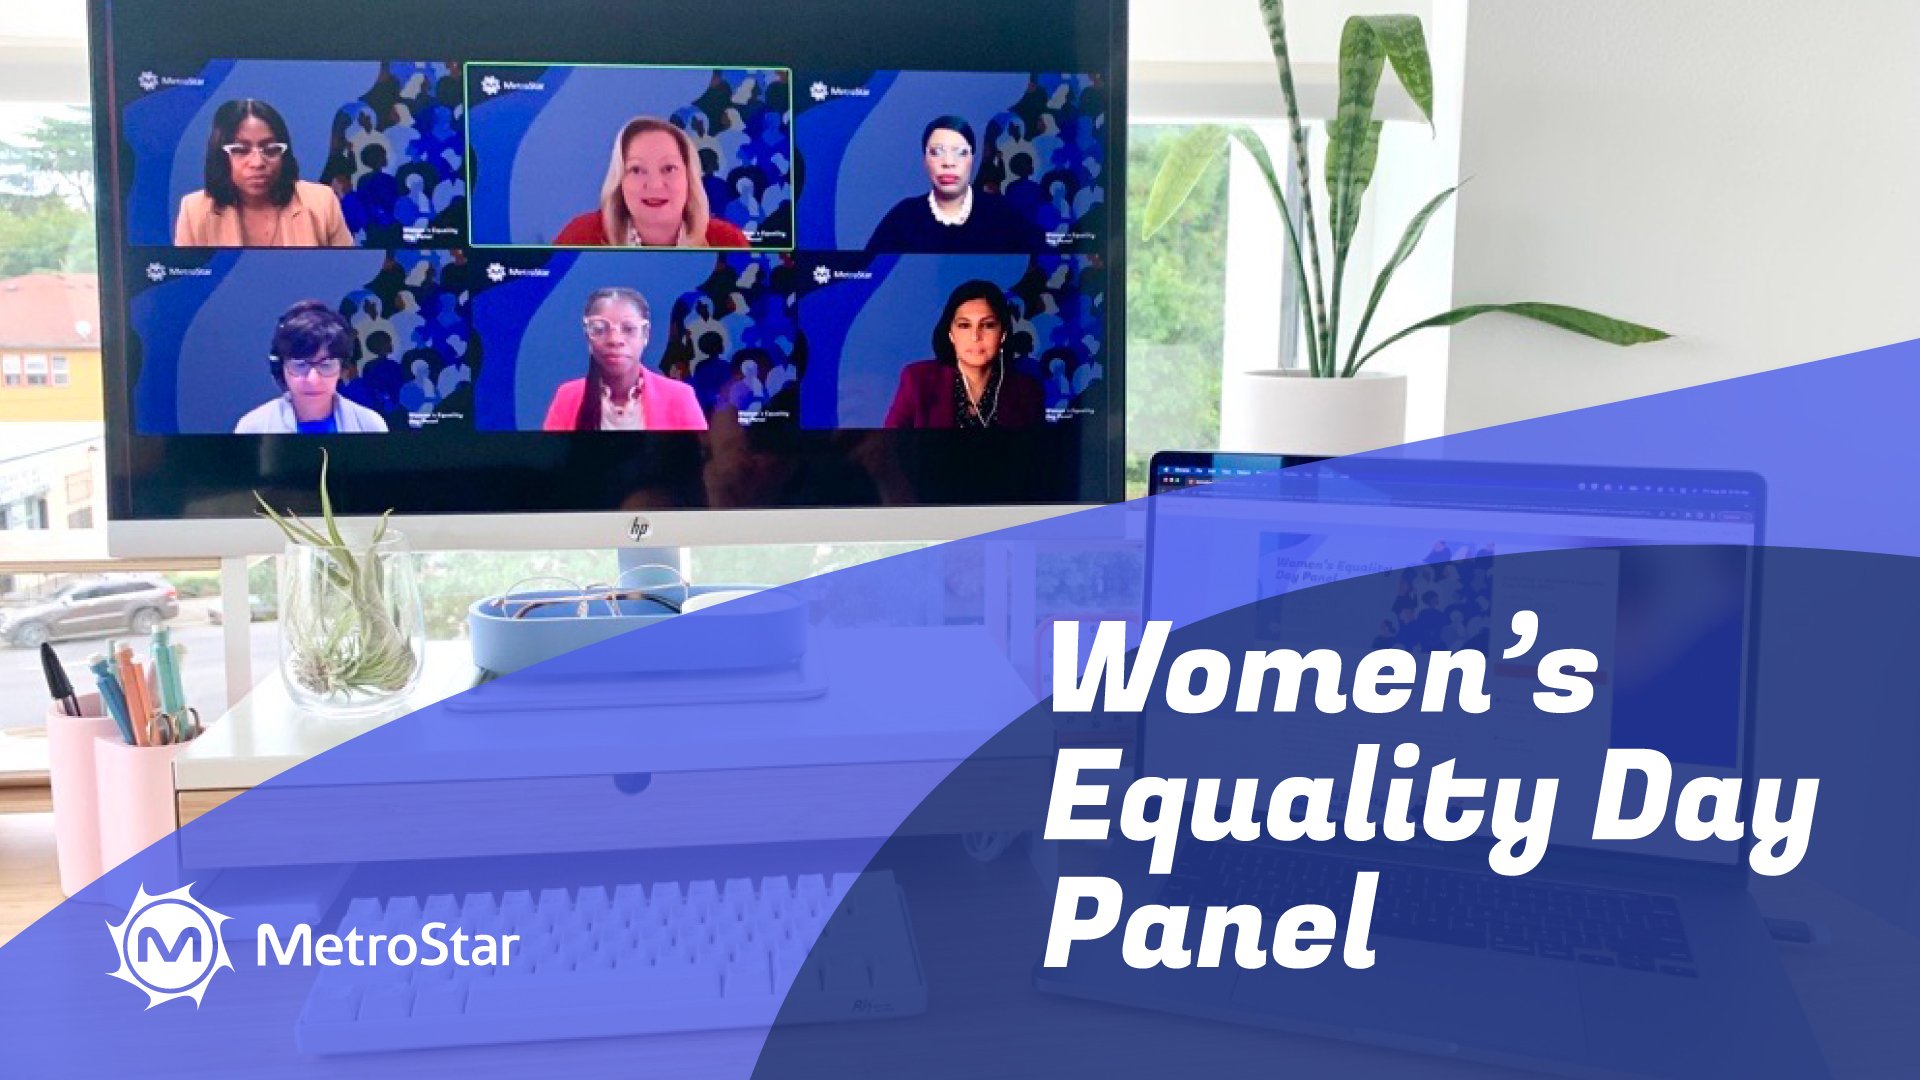 Women's Equality Day Panel screenshot from event 